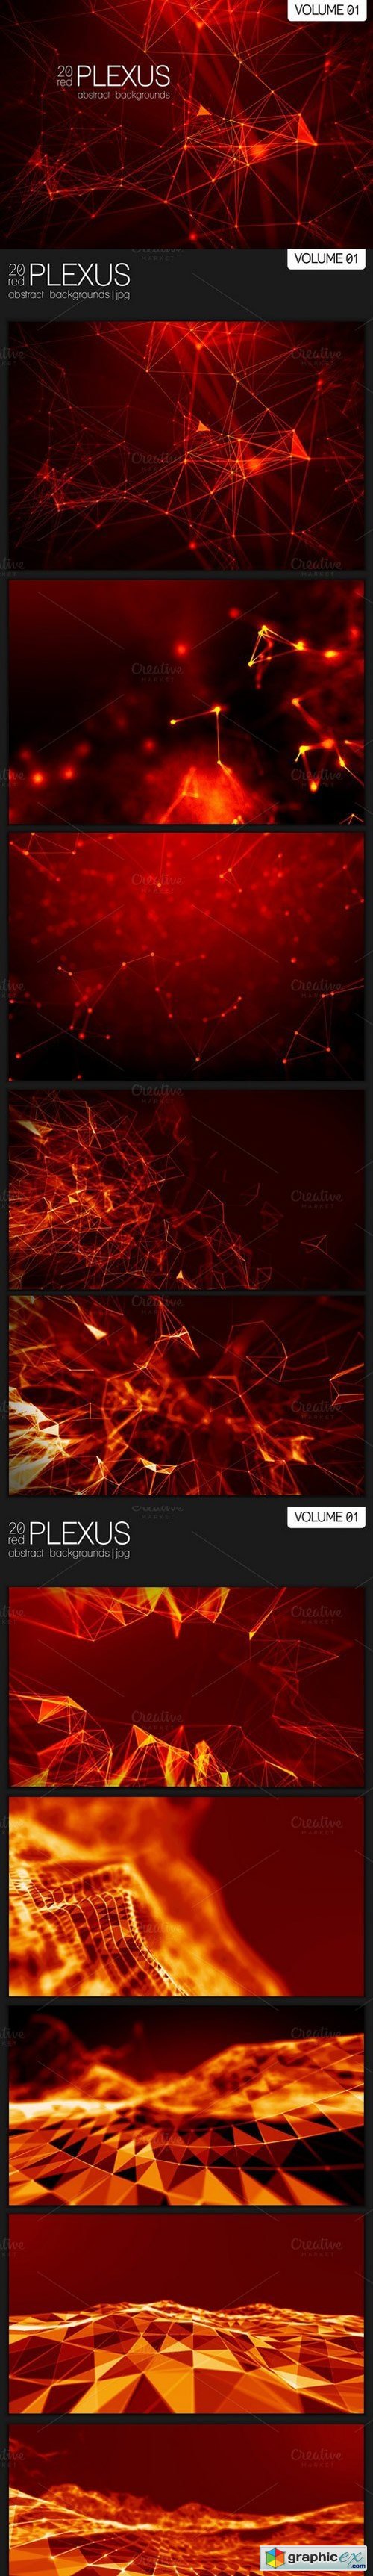 20 Red Abstract Plexus Backgrounds